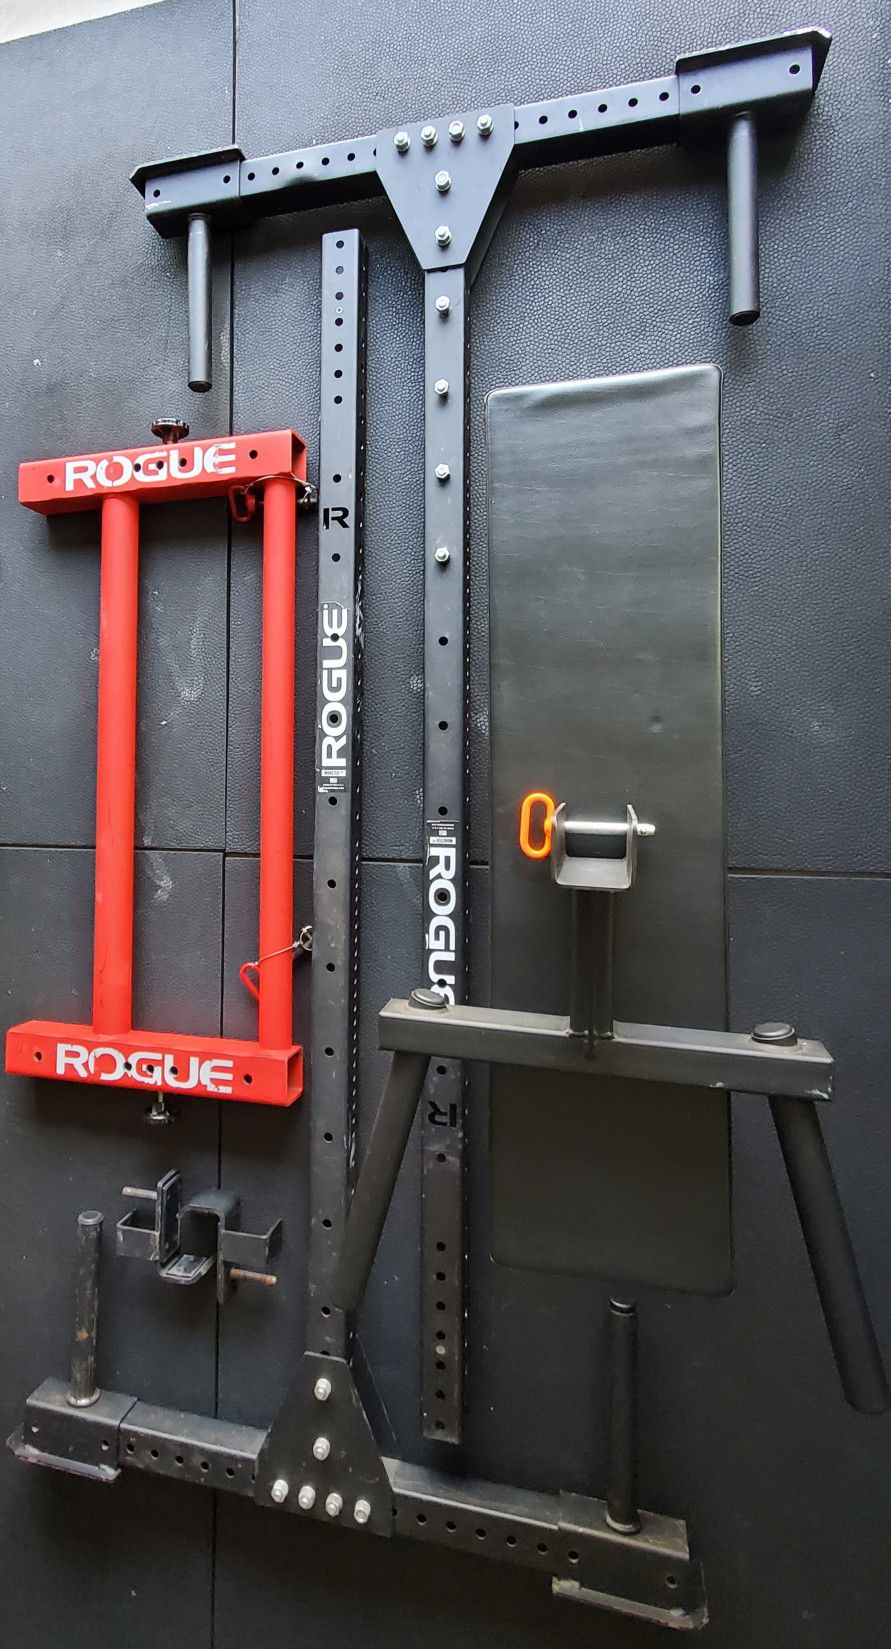 Rogue Yoke Squat Rack Stand Bench Matador Sled Bumper Plates Barbell Weights

PICKUP ONLY PLEASE. BUYER MUST CONTACT SELLER TO SCHEDULE IN-PERSON INSP